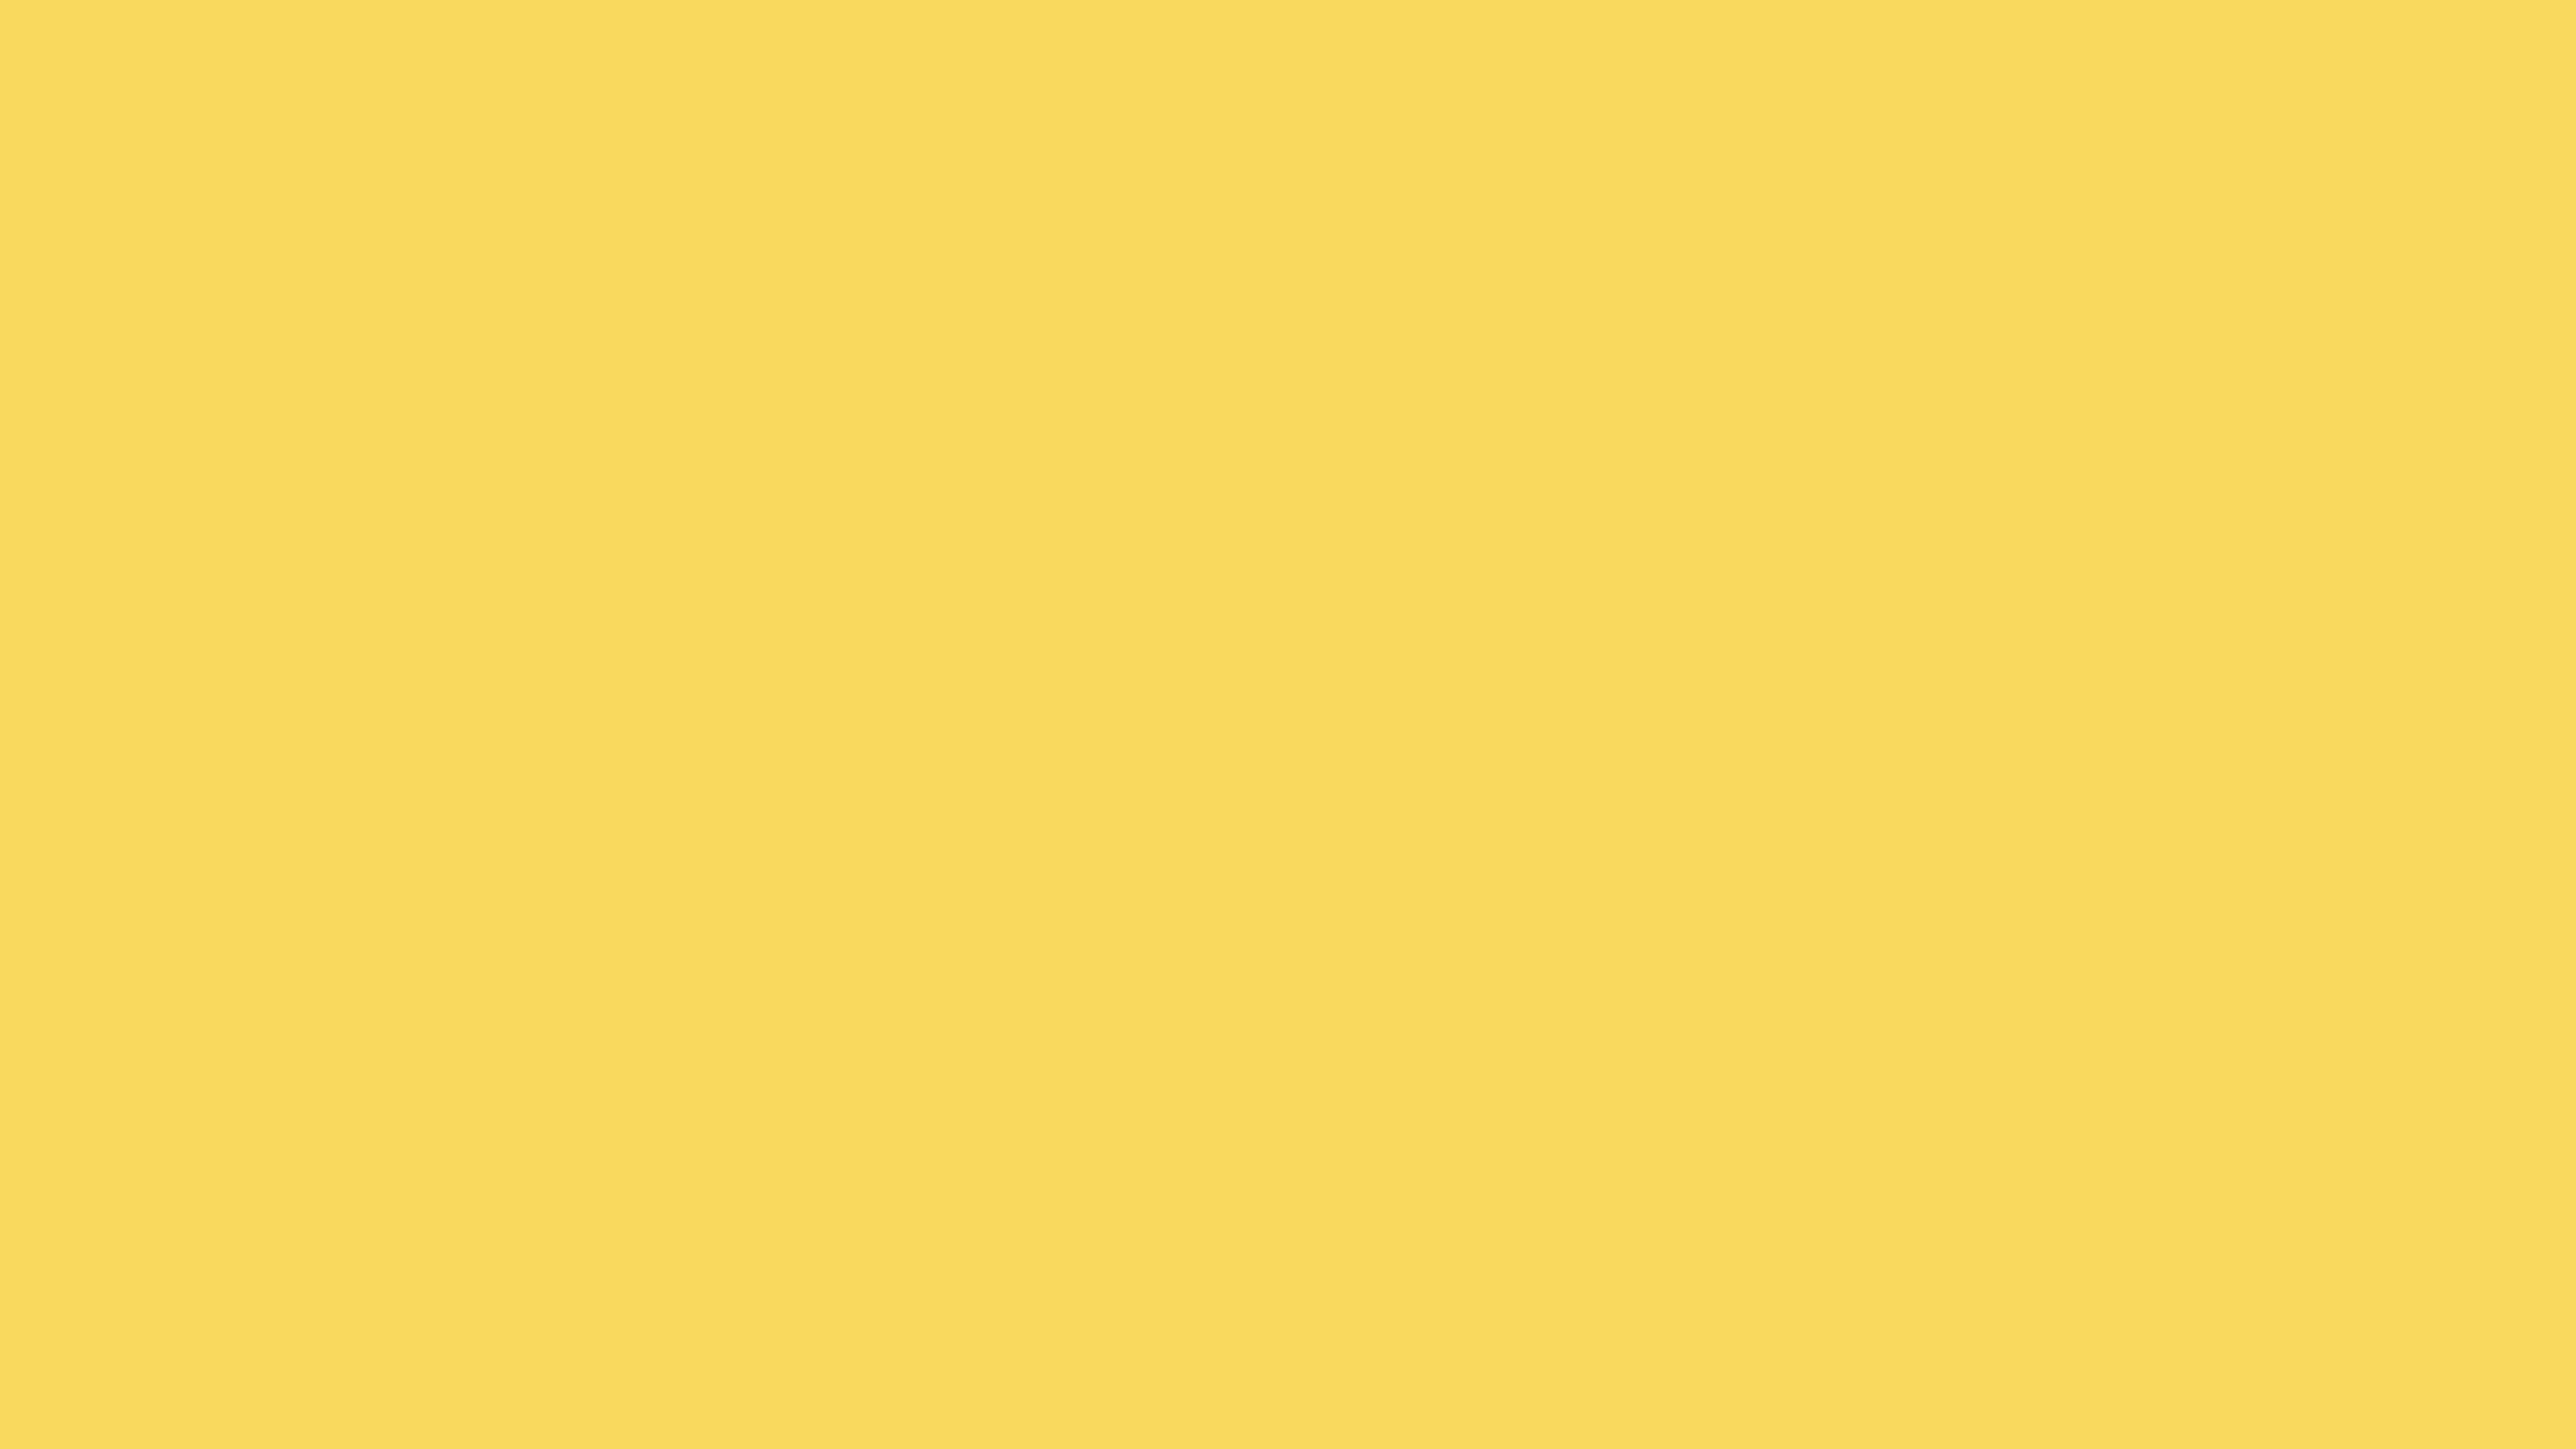 4096x2304 Royal Yellow Solid Color Background